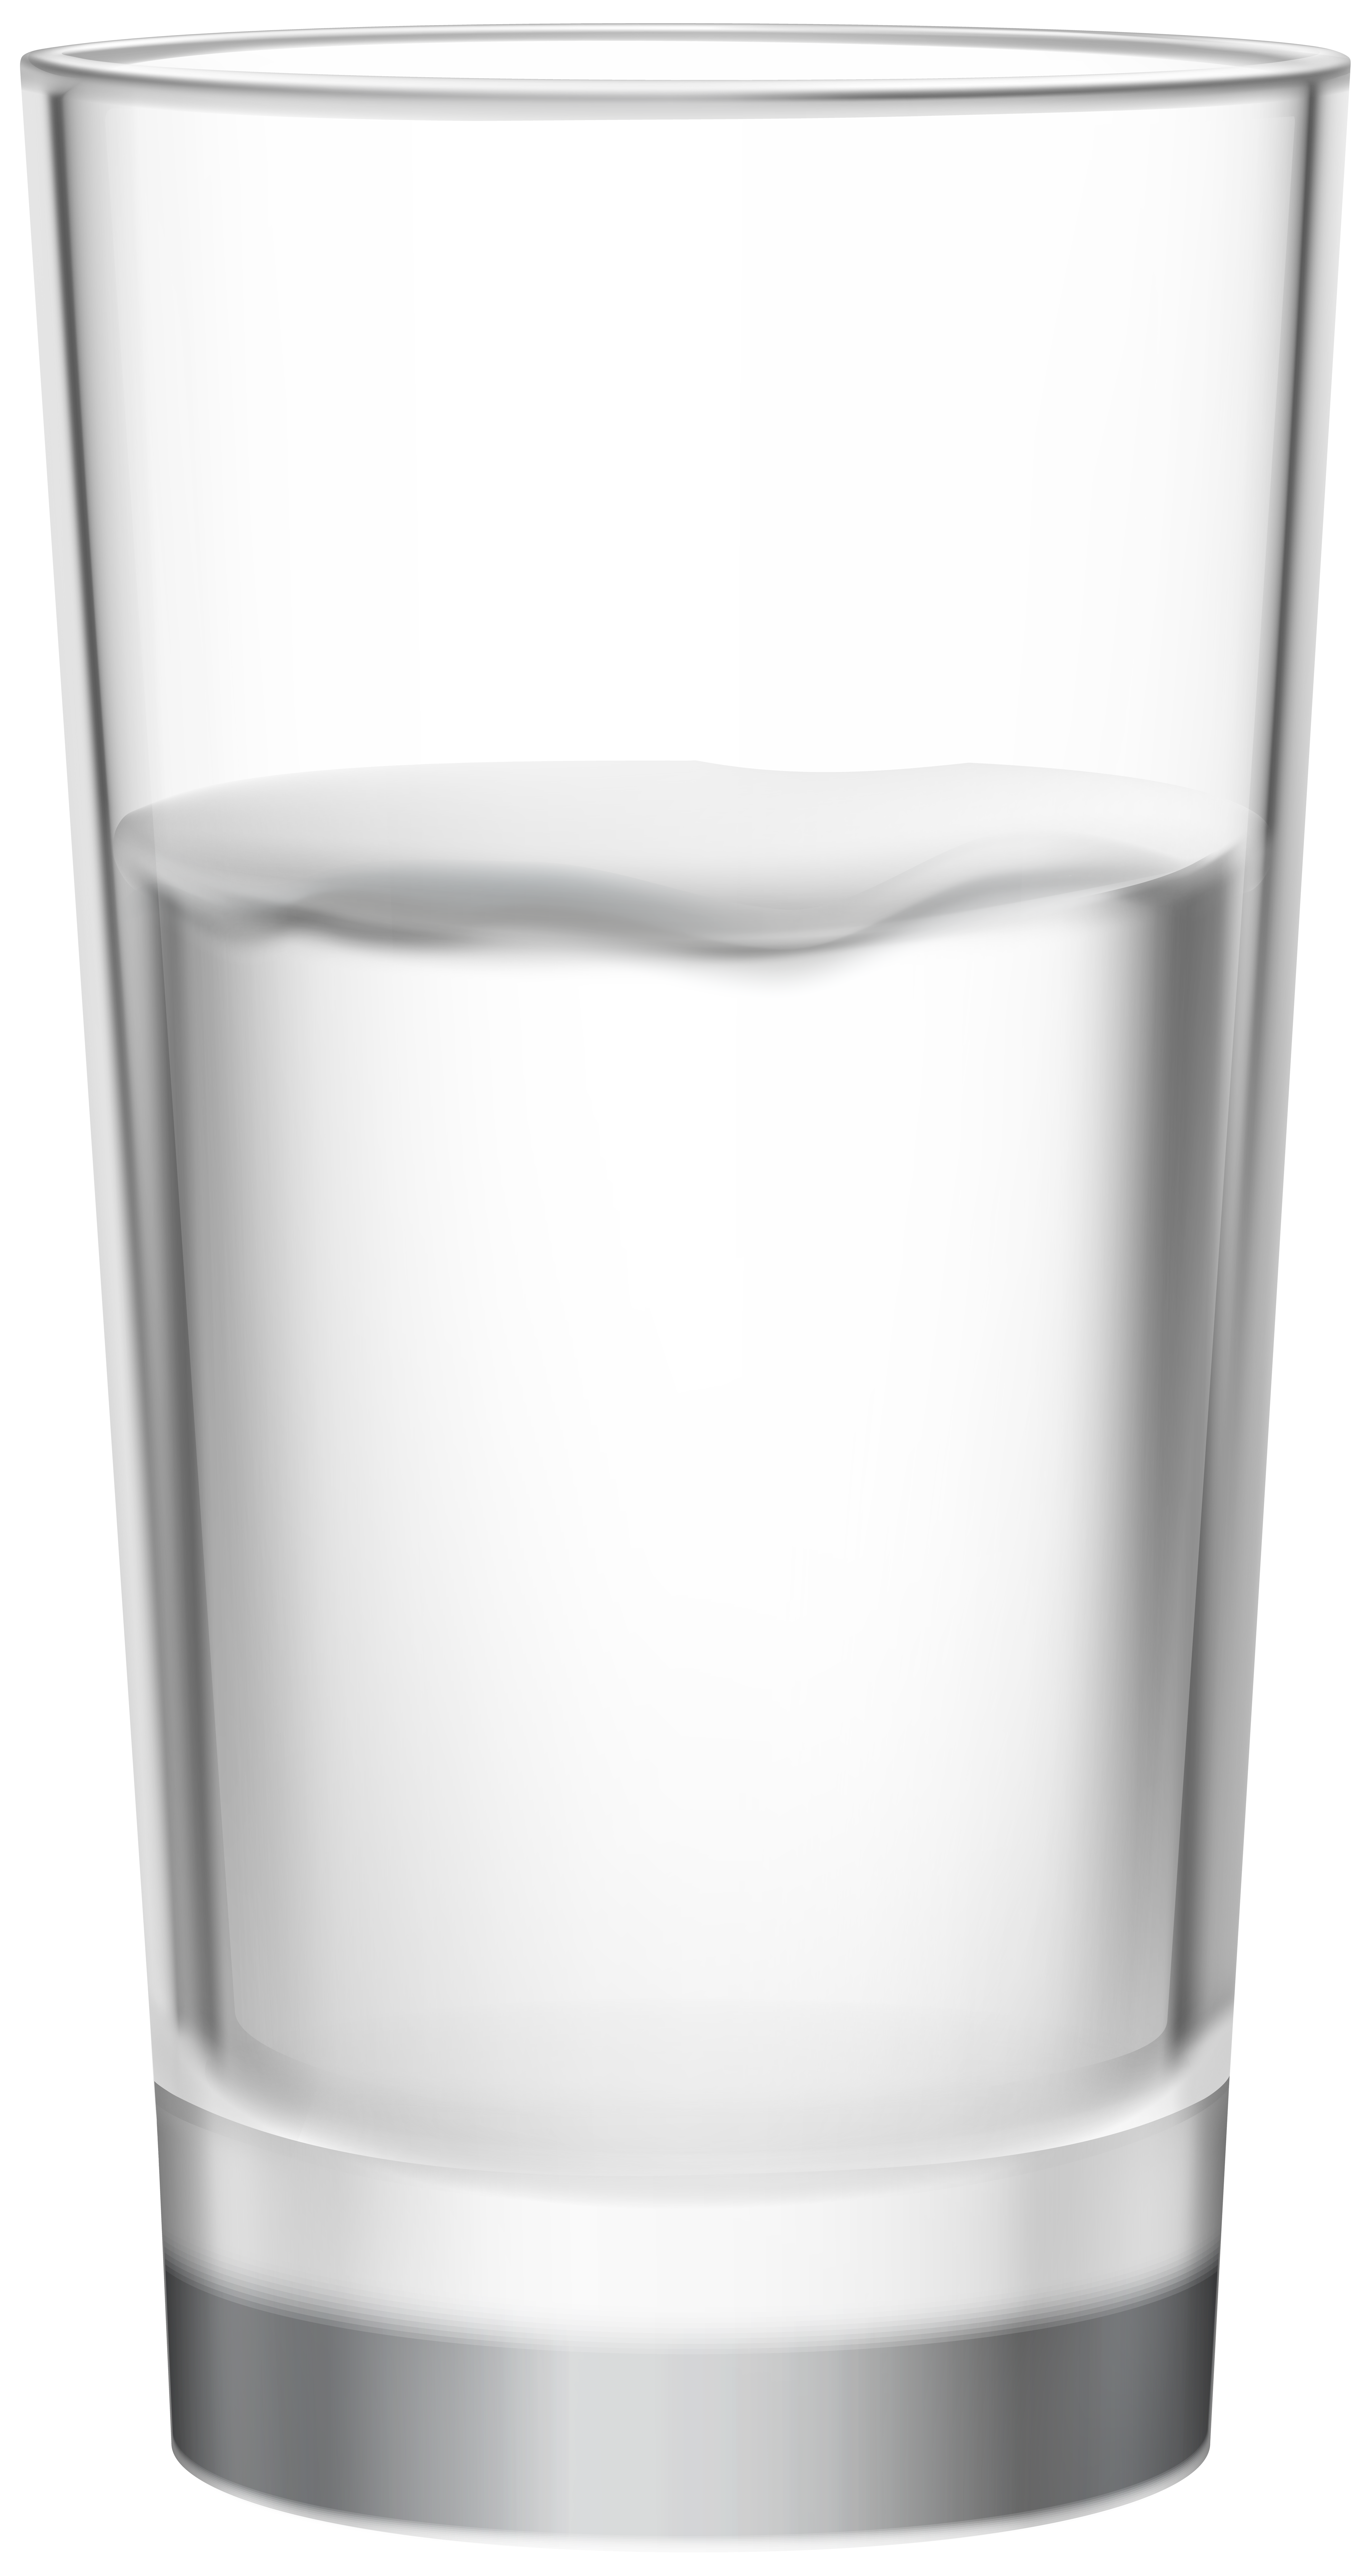 glass of water png